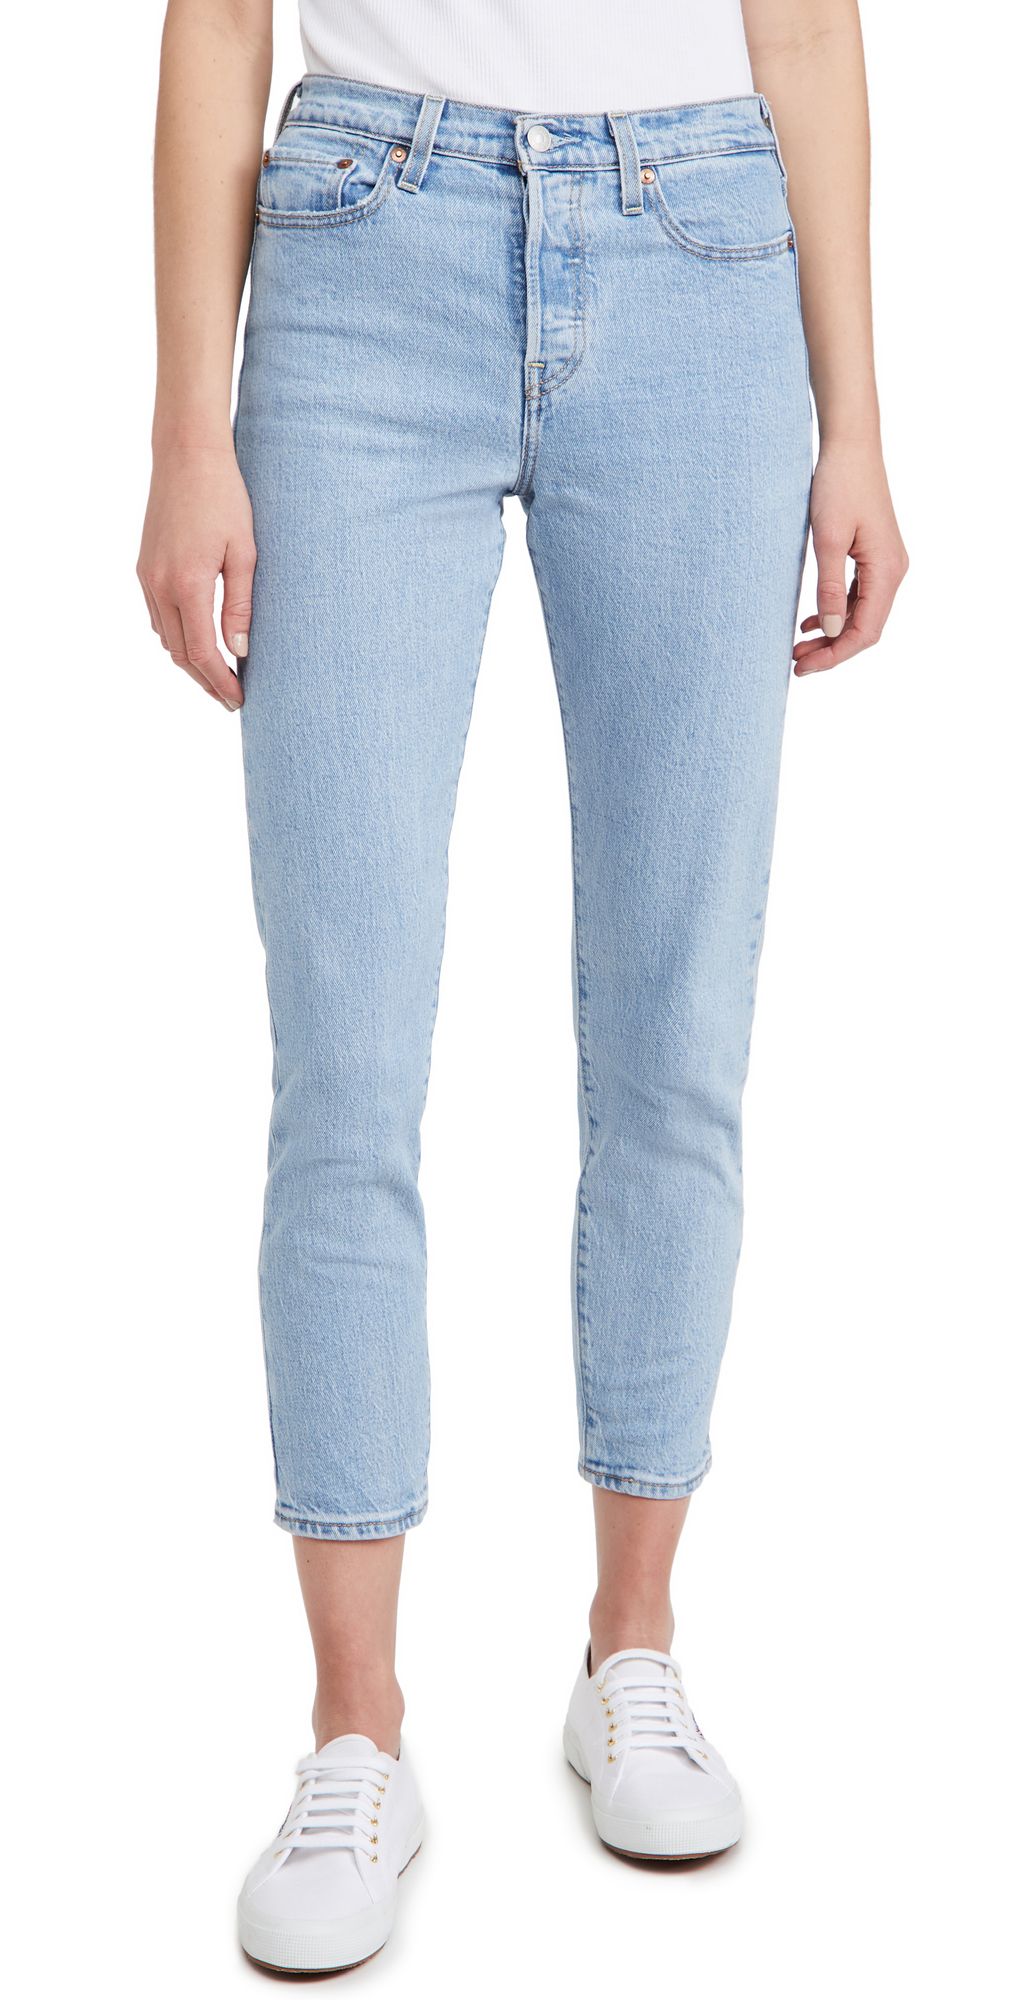 Levi's Wedgie Icon Fit Jeans | Shopbop